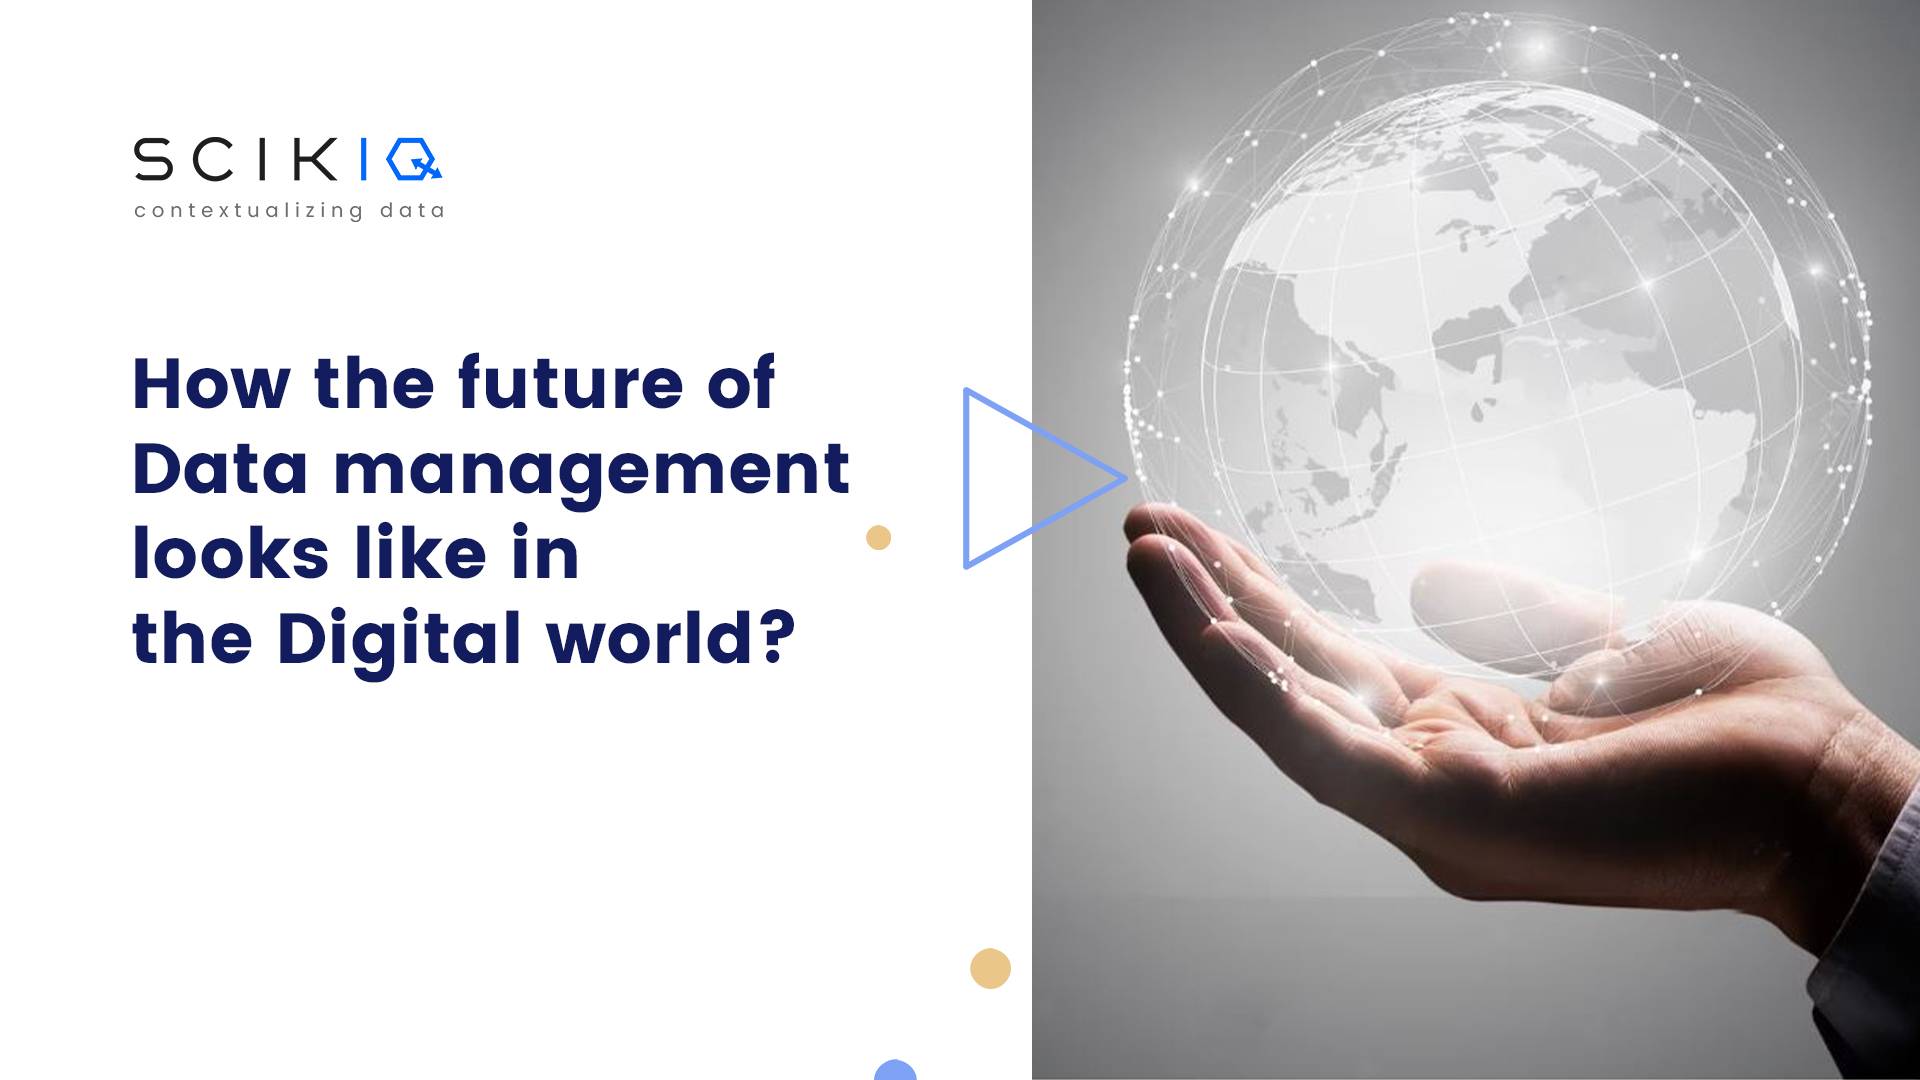 How does Data management work in the Modern Digital world?